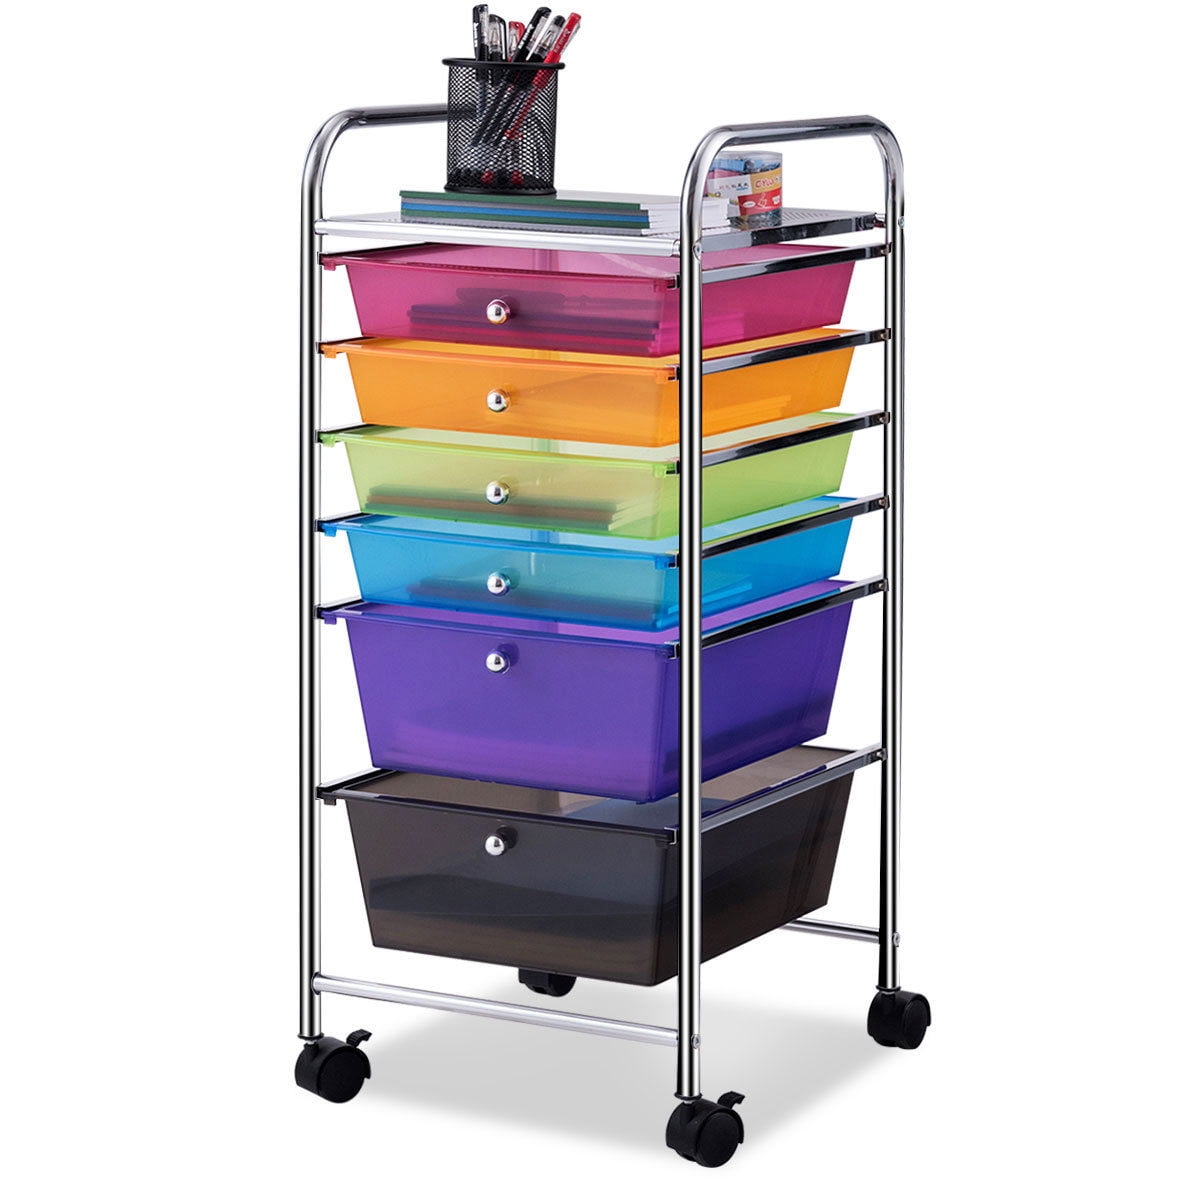 WELLFOR 10 Drawer Rolling Storage Cart Tools Scrapbook Stationery Mobile Rolling Storage with Tray Cart Office School Home Organizer Black